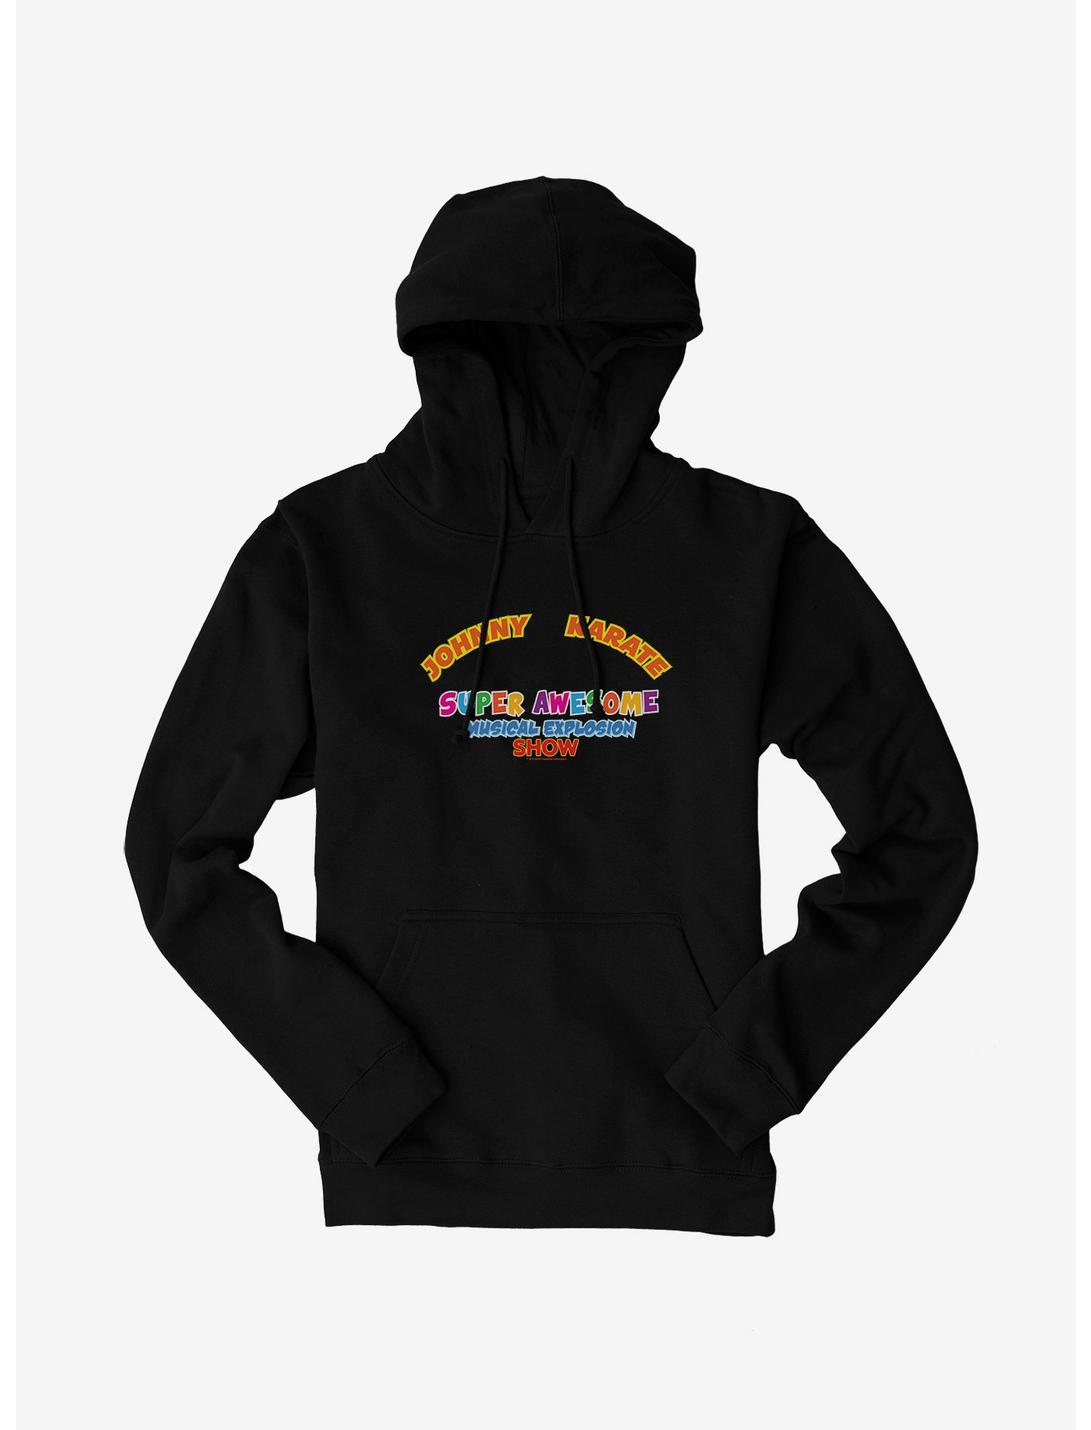 Parks And Recreation Johnny Karate Show Hoodie, BLACK, hi-res